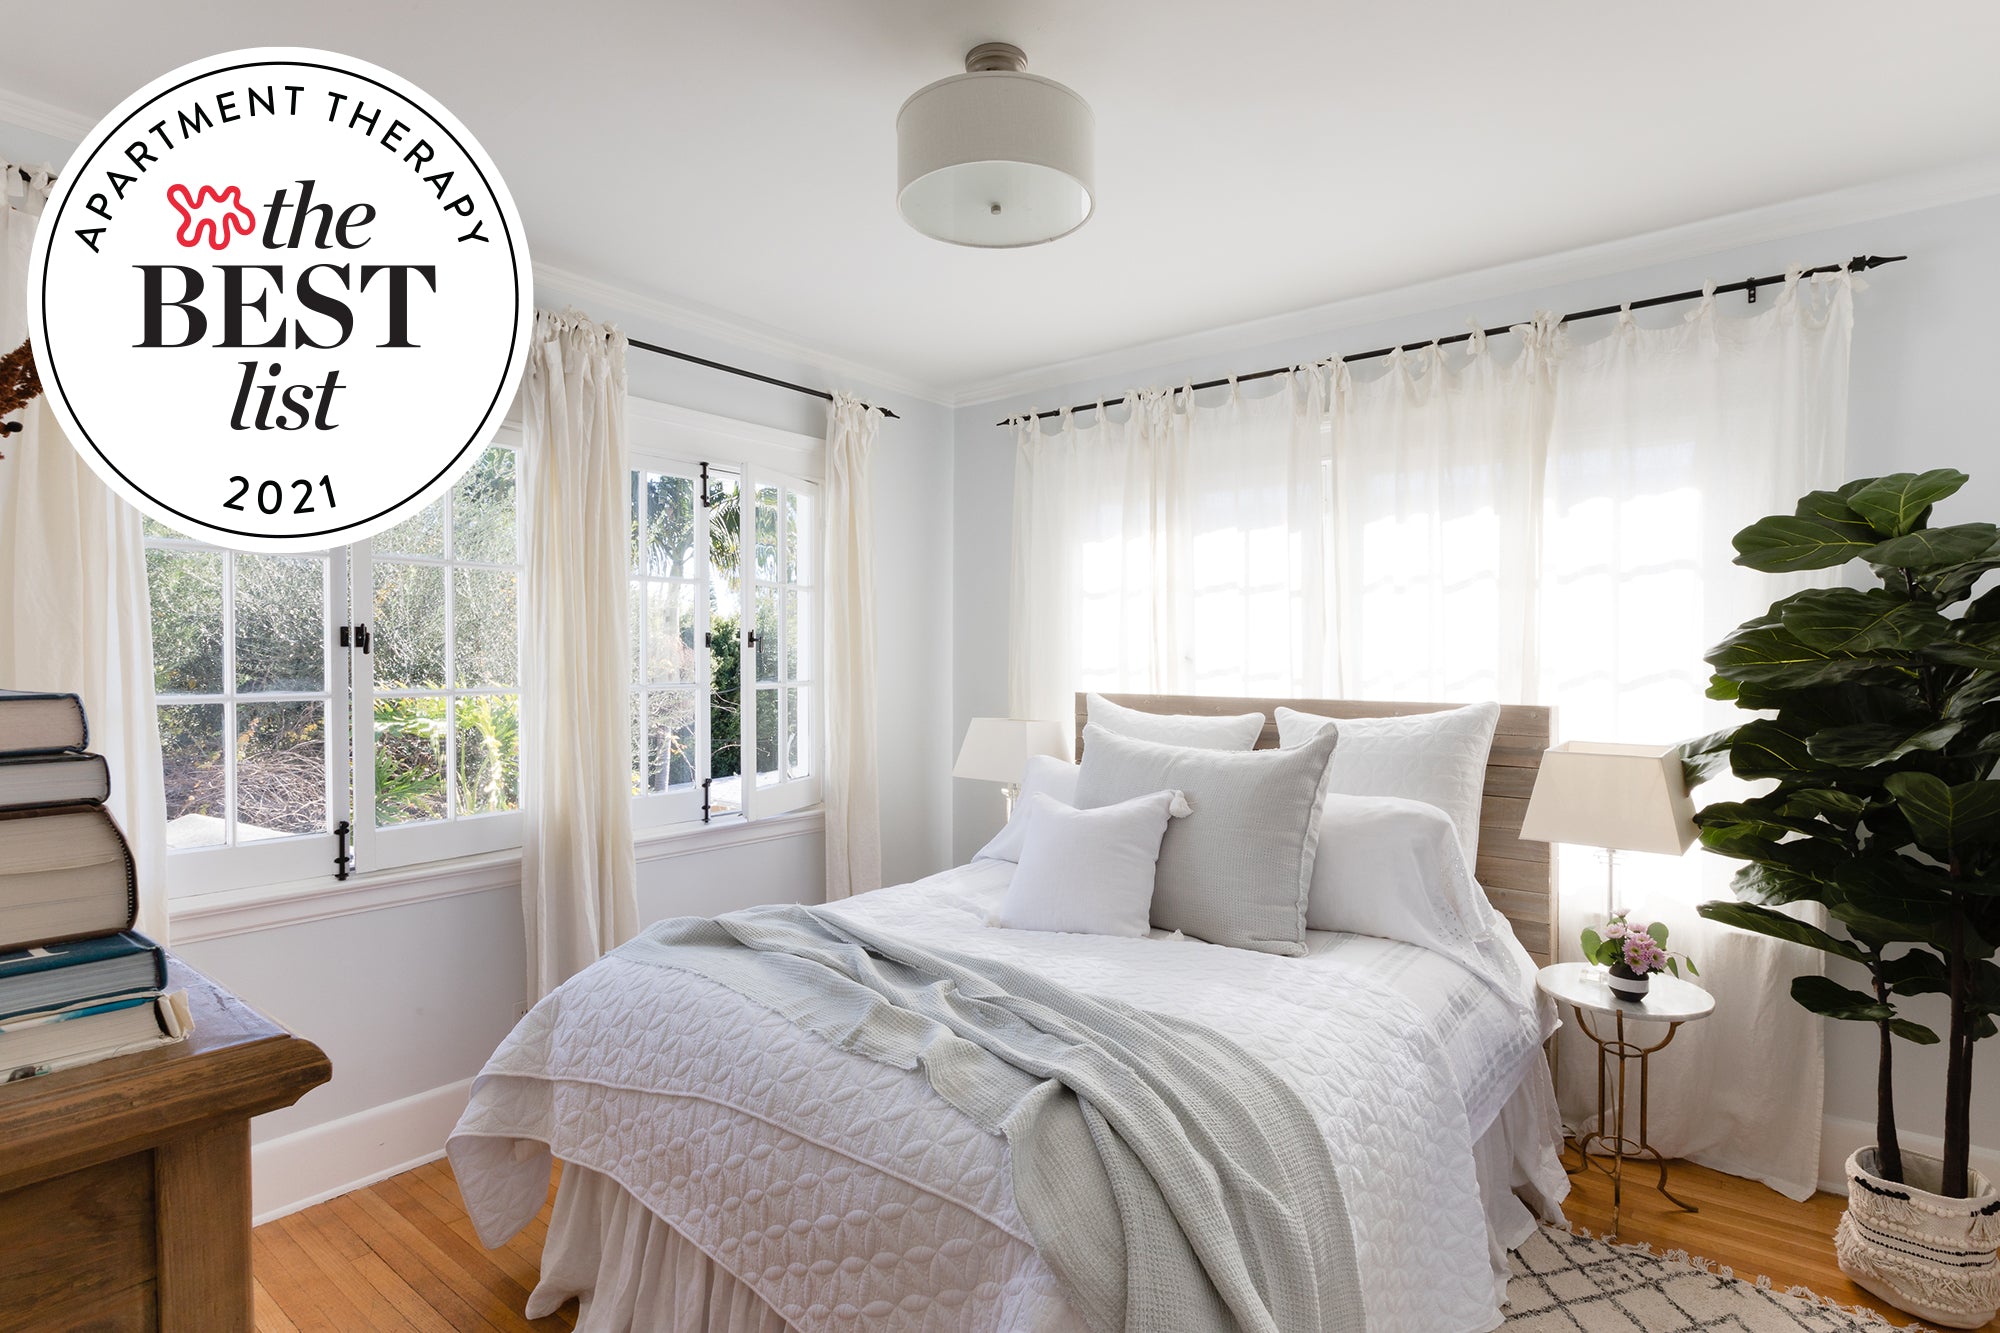 Apartment Therapy: Best Breathable Cooling Sheet Sets 2021